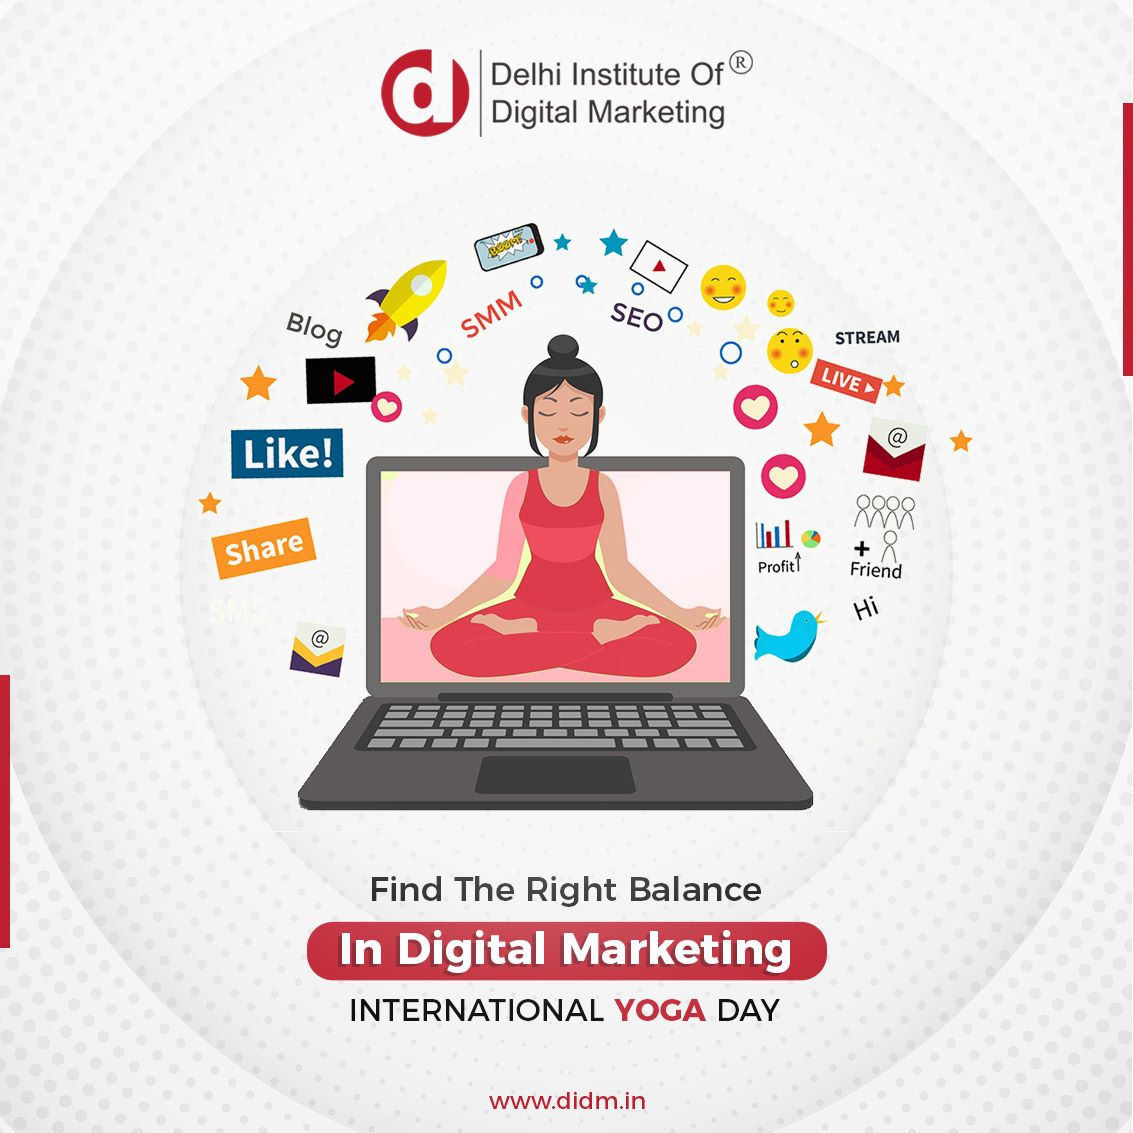 DIDM wishes you all a happy Yoga Day